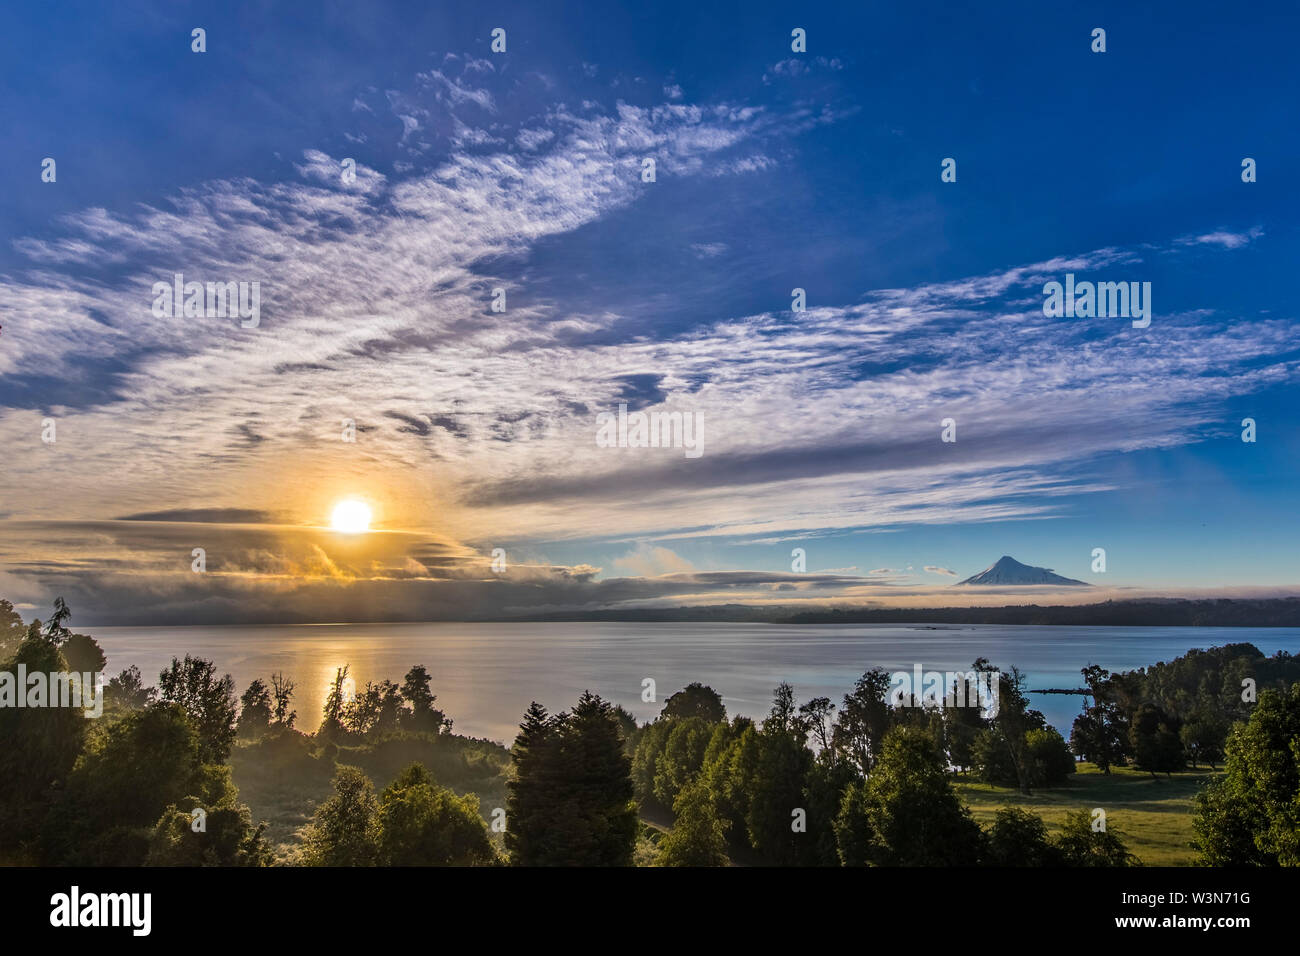 A dramatical sky view in between the clouds over Rupanco Lake, one of the Great lakes in Southern Chile during sunrise an amazing volcanic landscape Stock Photo